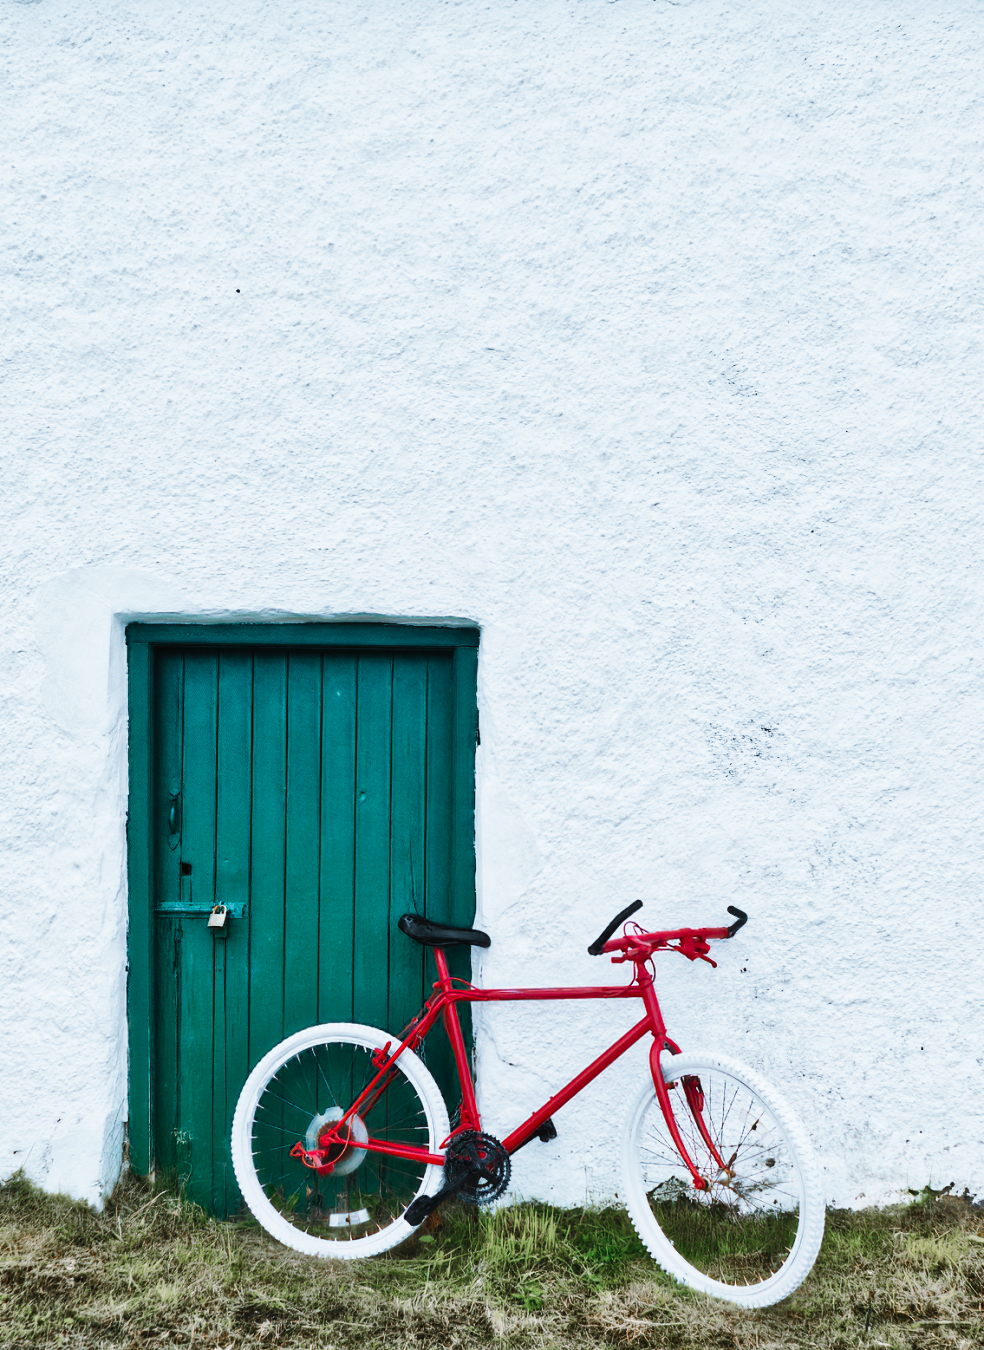 red bicycle